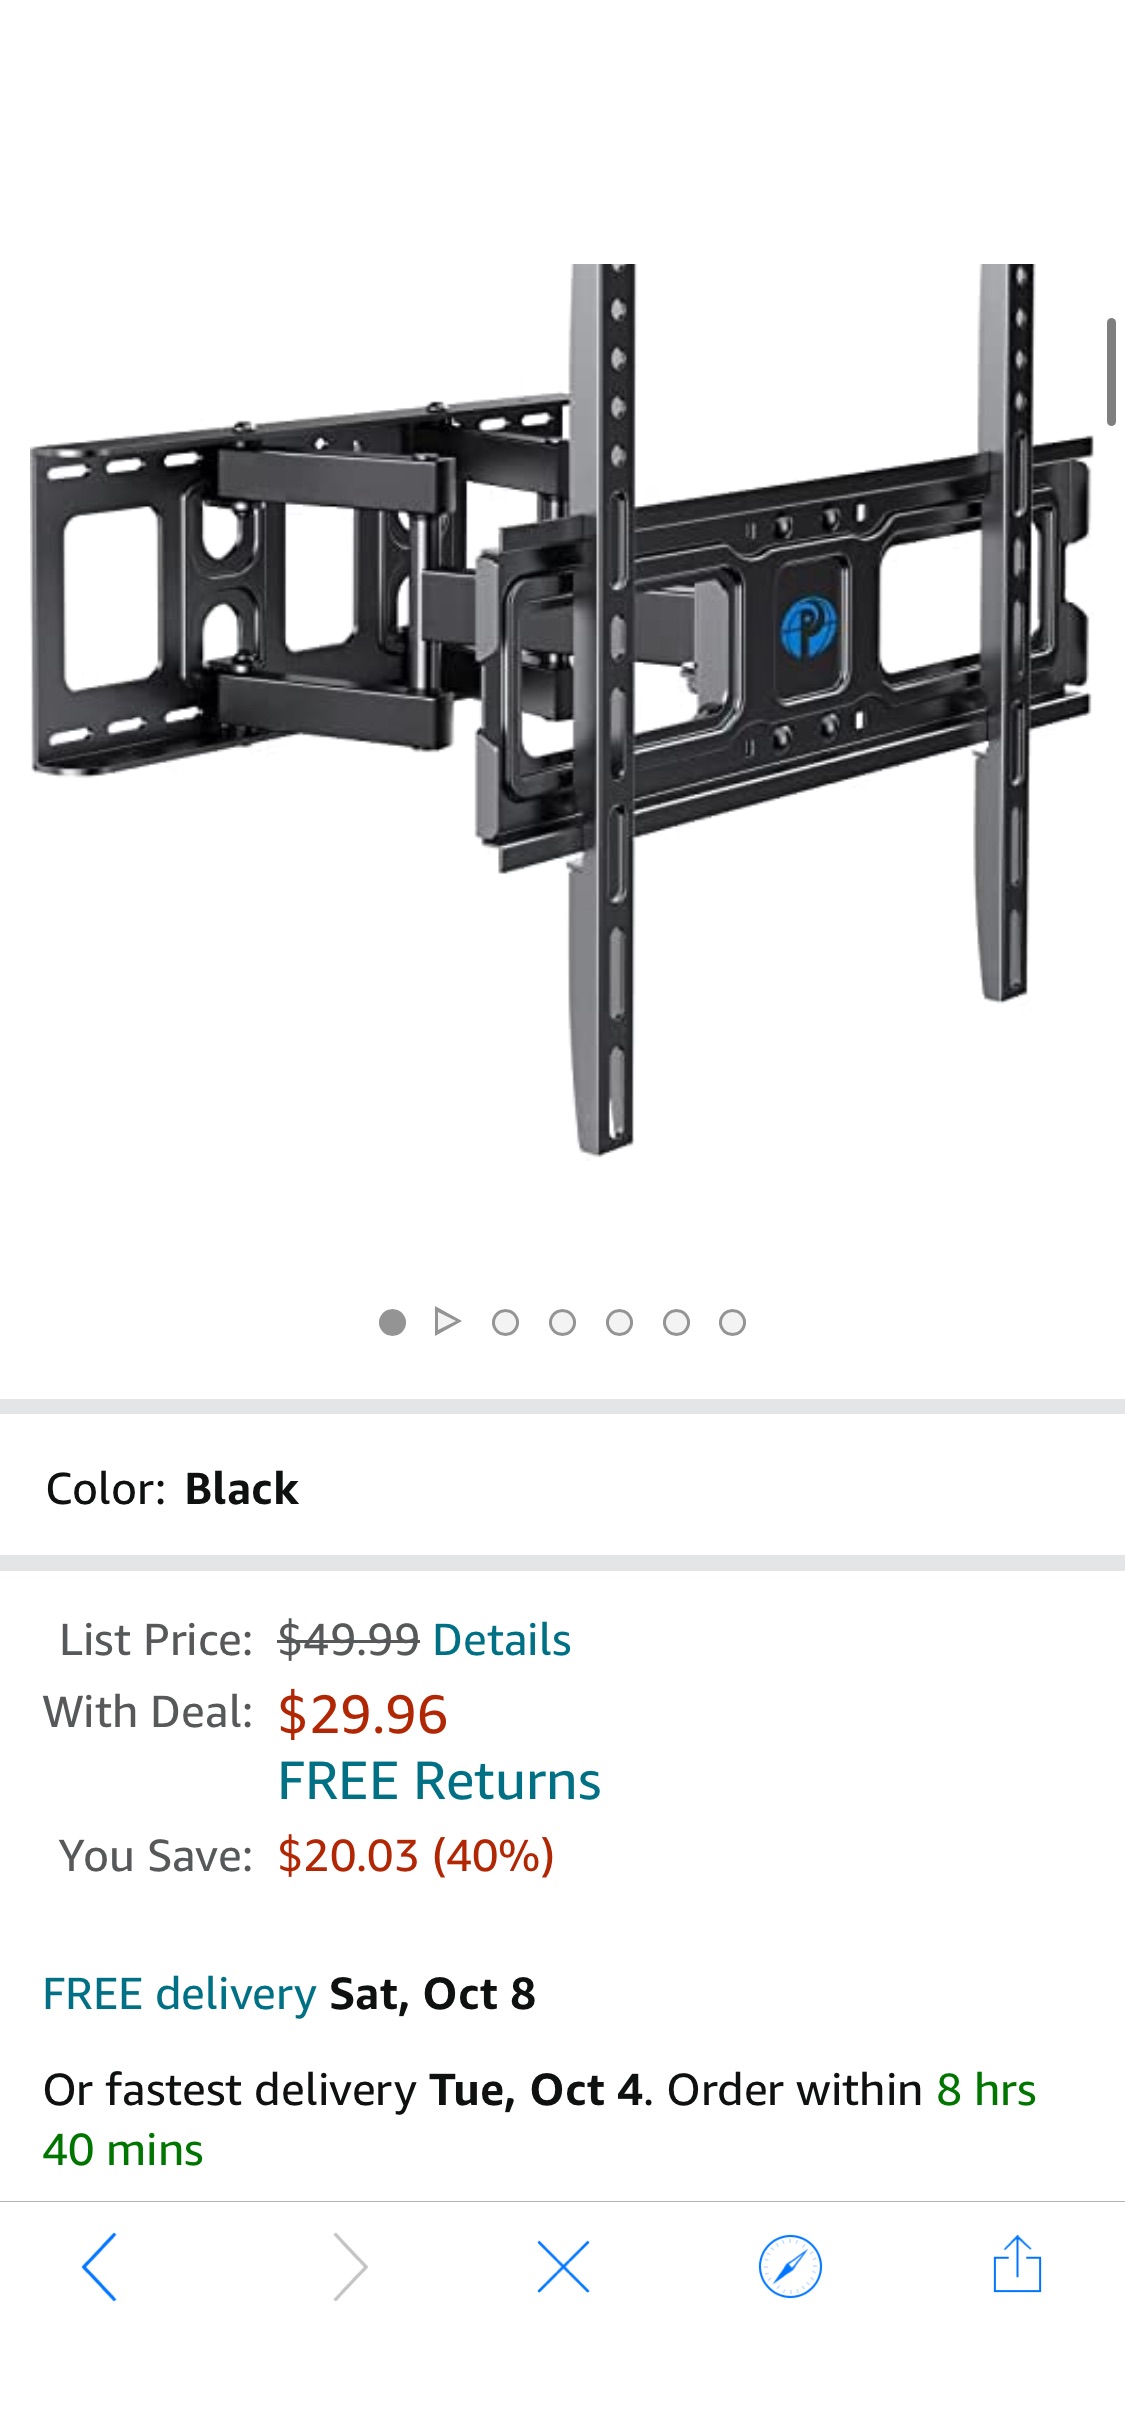 Amazon.com: Pipishell TV Wall Mount for 26-65 inch TVs, Full Motion TV Mount Bracket with Articulating Swivel Extension Tilting Leveling Max VESA 400x400mm Holds up to 99lbs for LED LCD OLED 4K